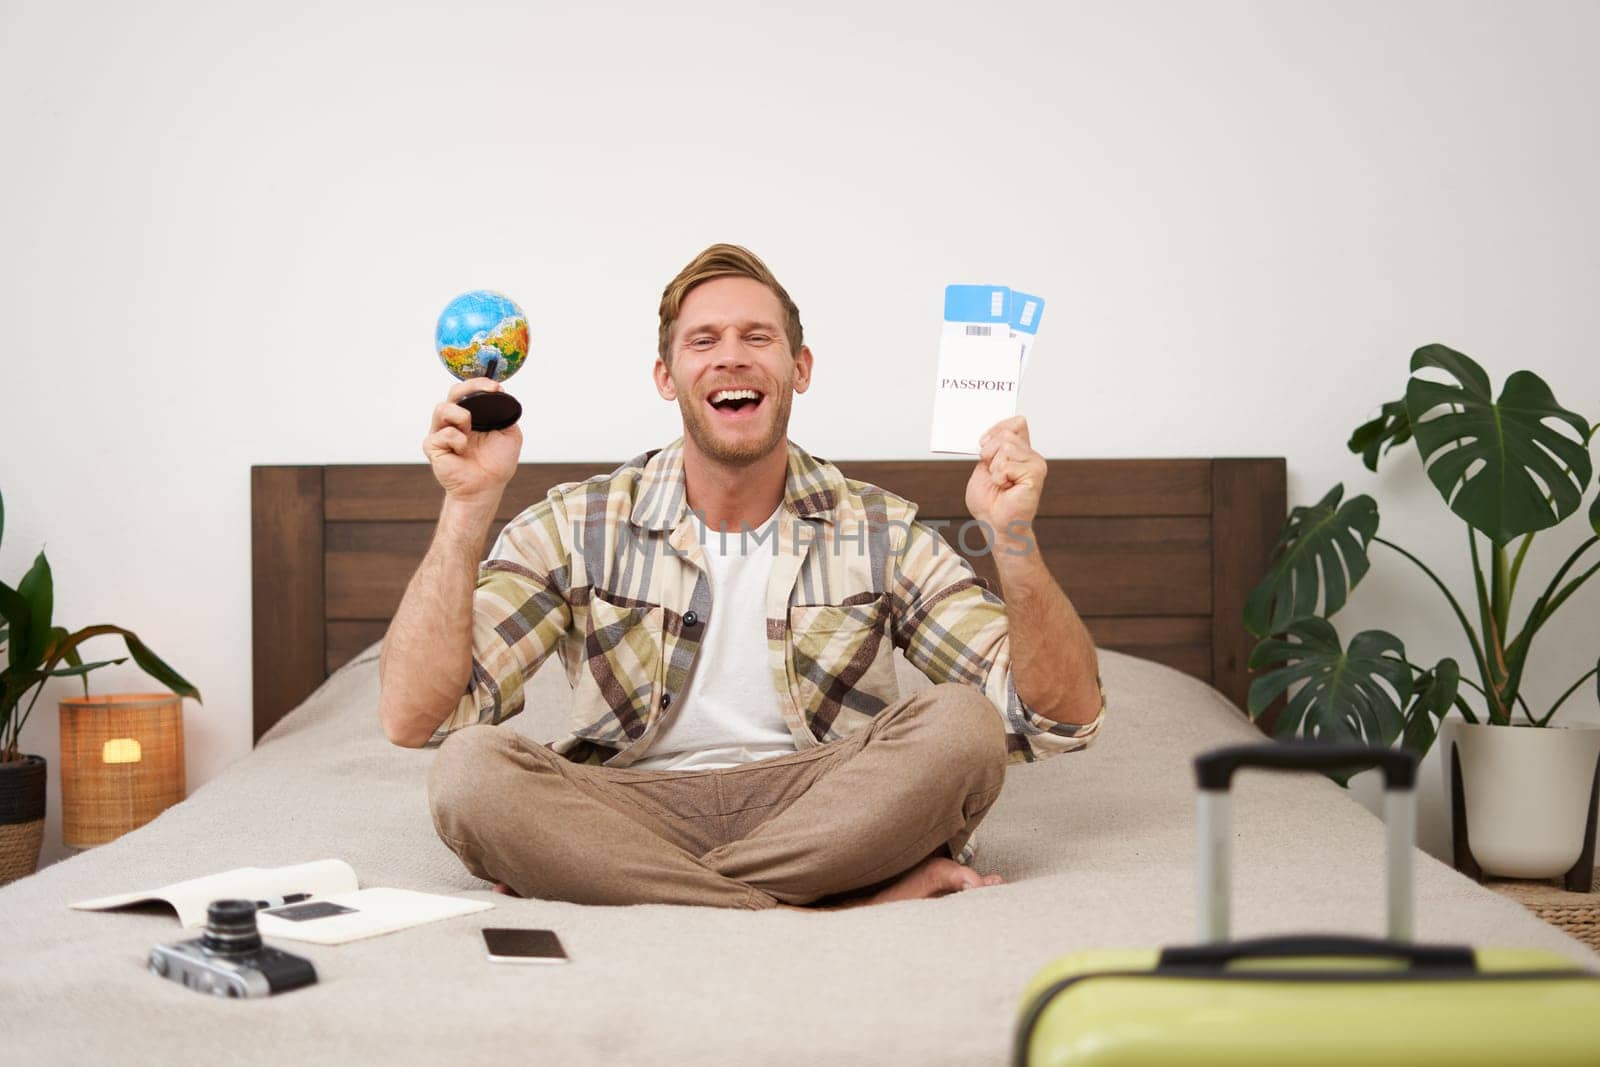 Portrait of cheerful, happy tourist, man sitting with plane tickets and a globe, packed suitcase for travelling around the world, going on vacation, excited about his holiday.